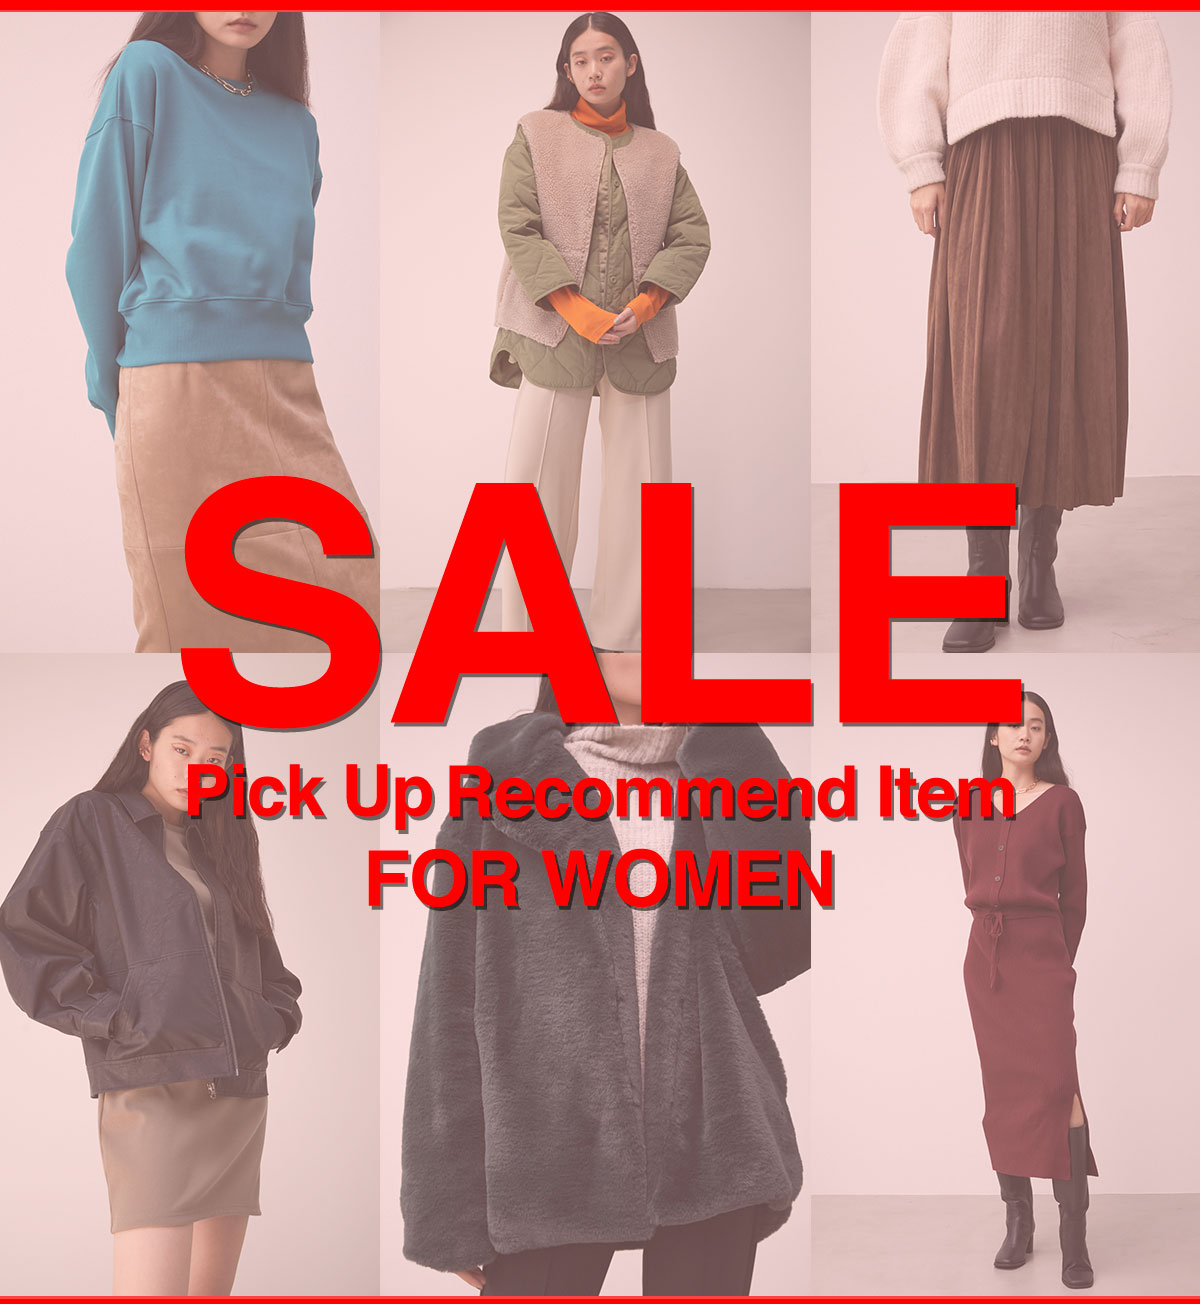 SALE Pick Up Recommend Item FOR WOMEN